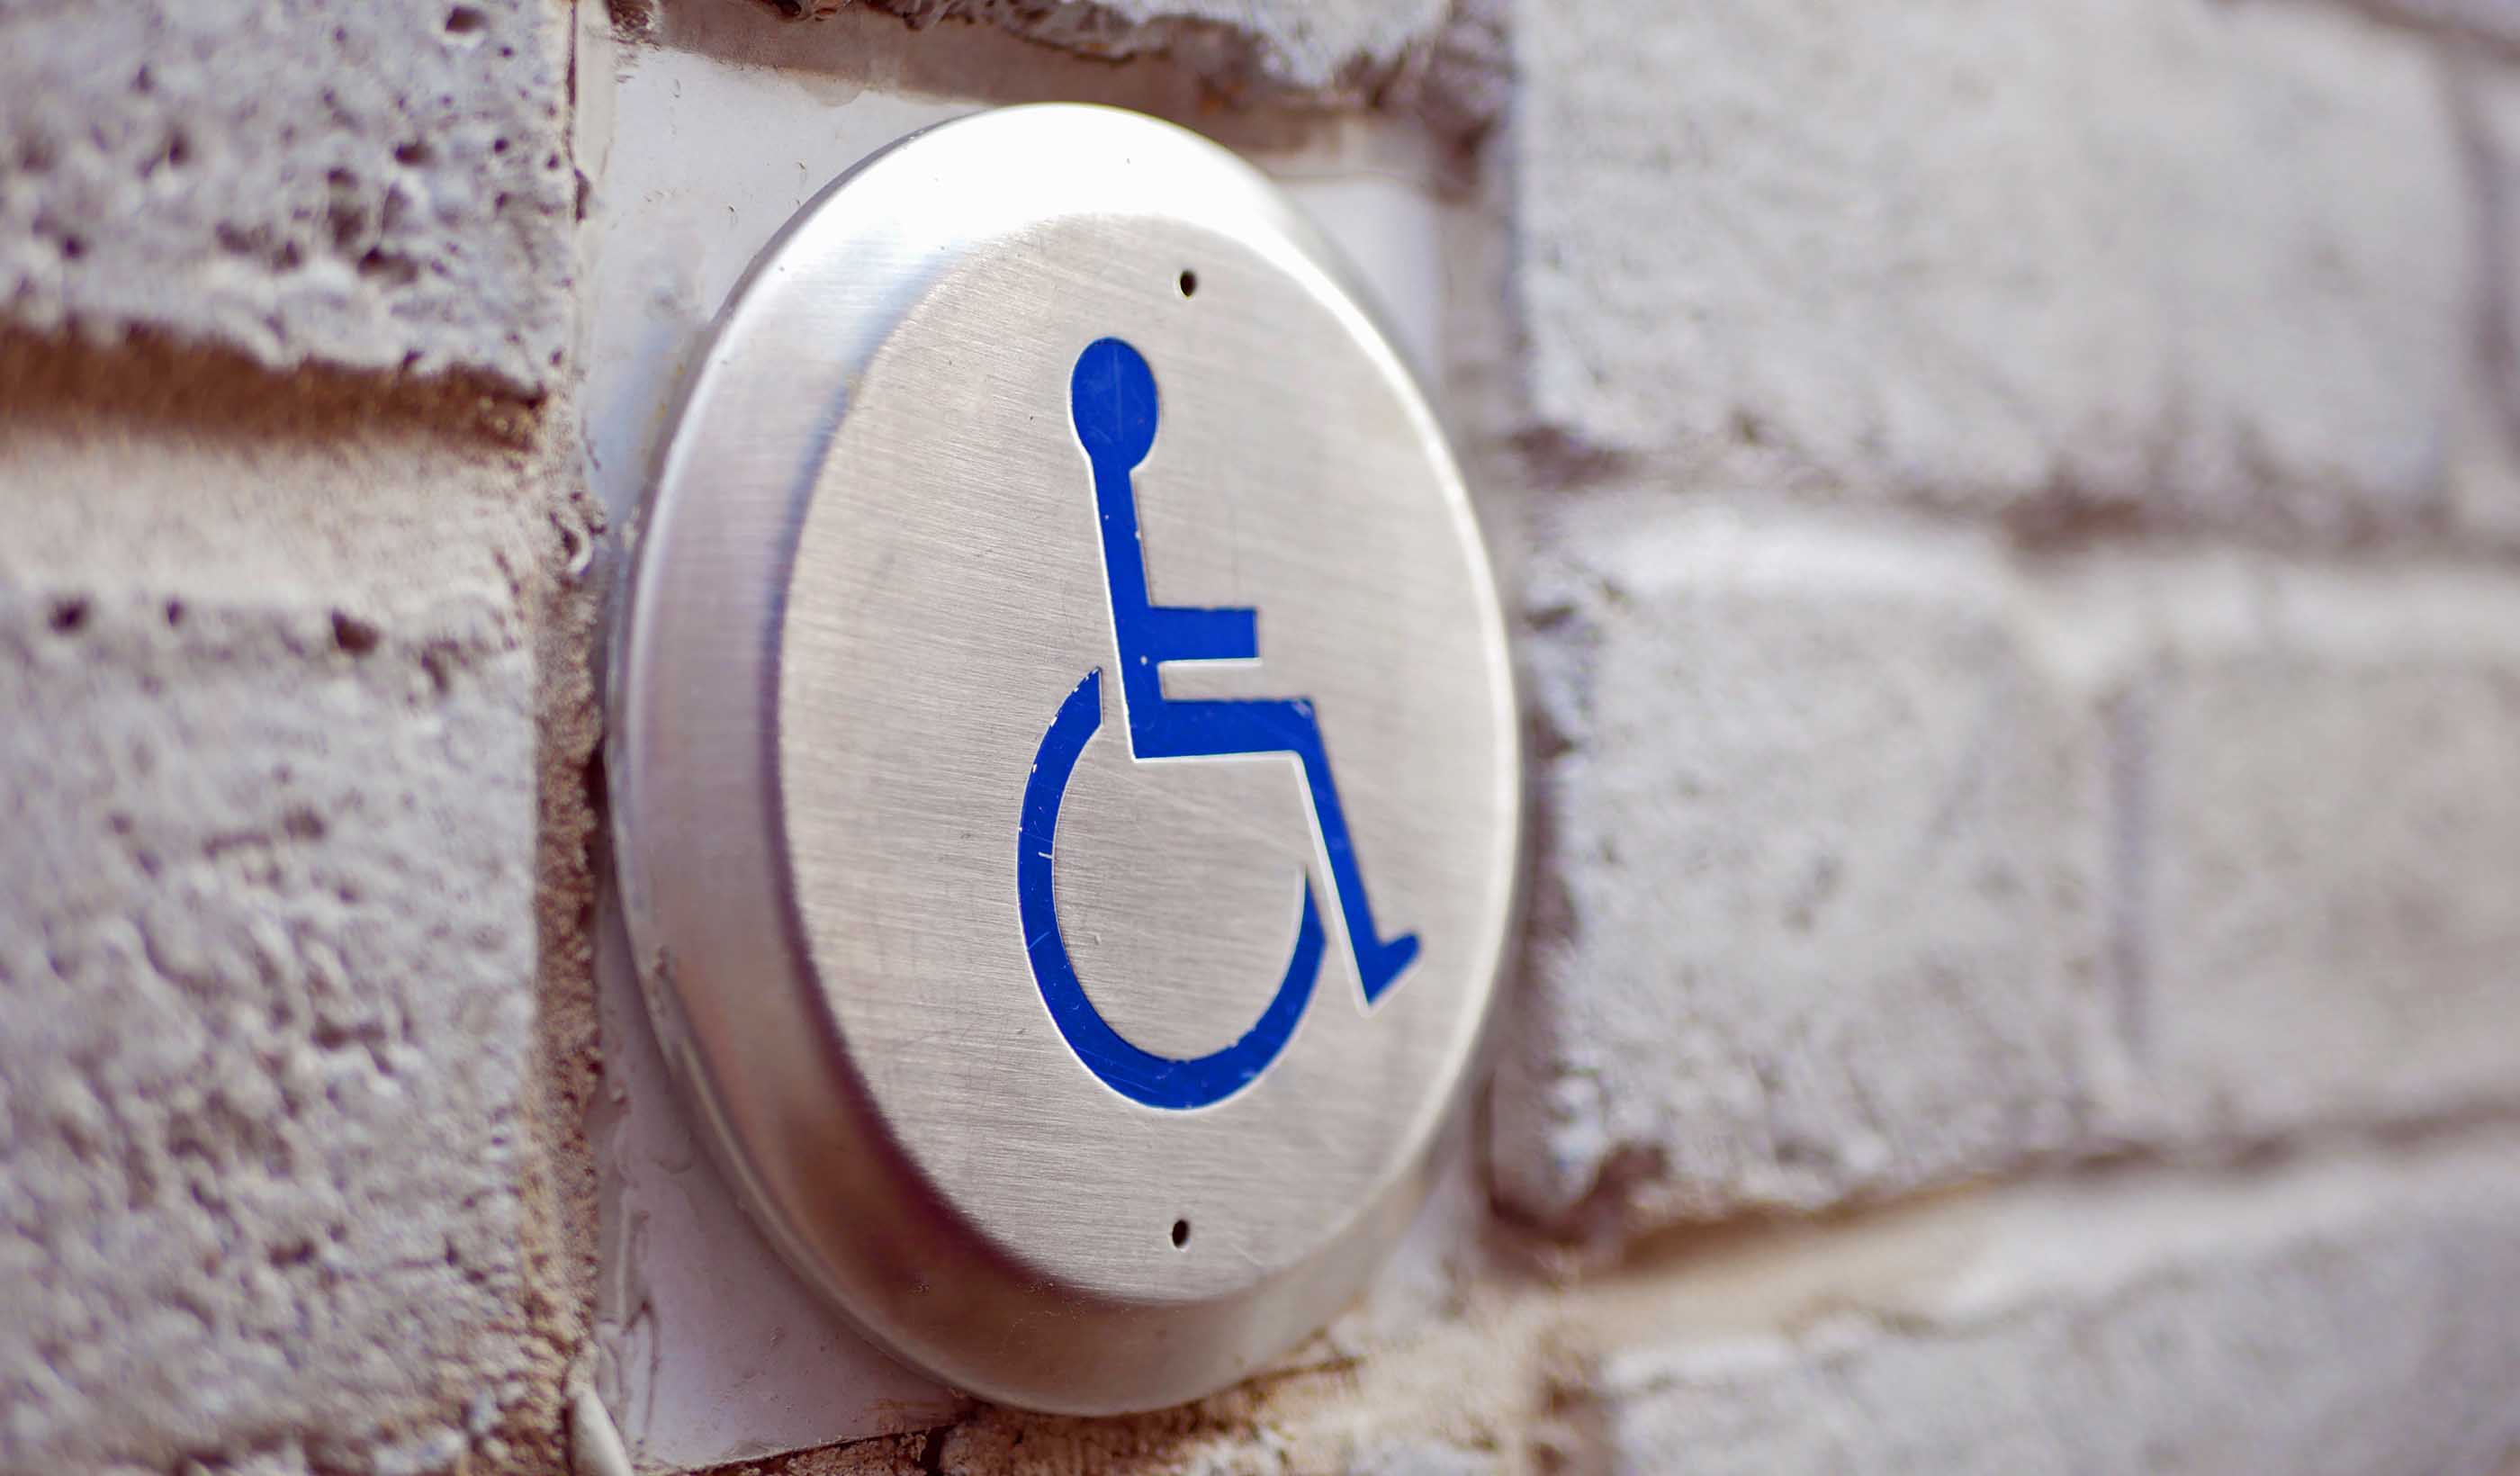 Accessibility isn’t just the law, it’s good business